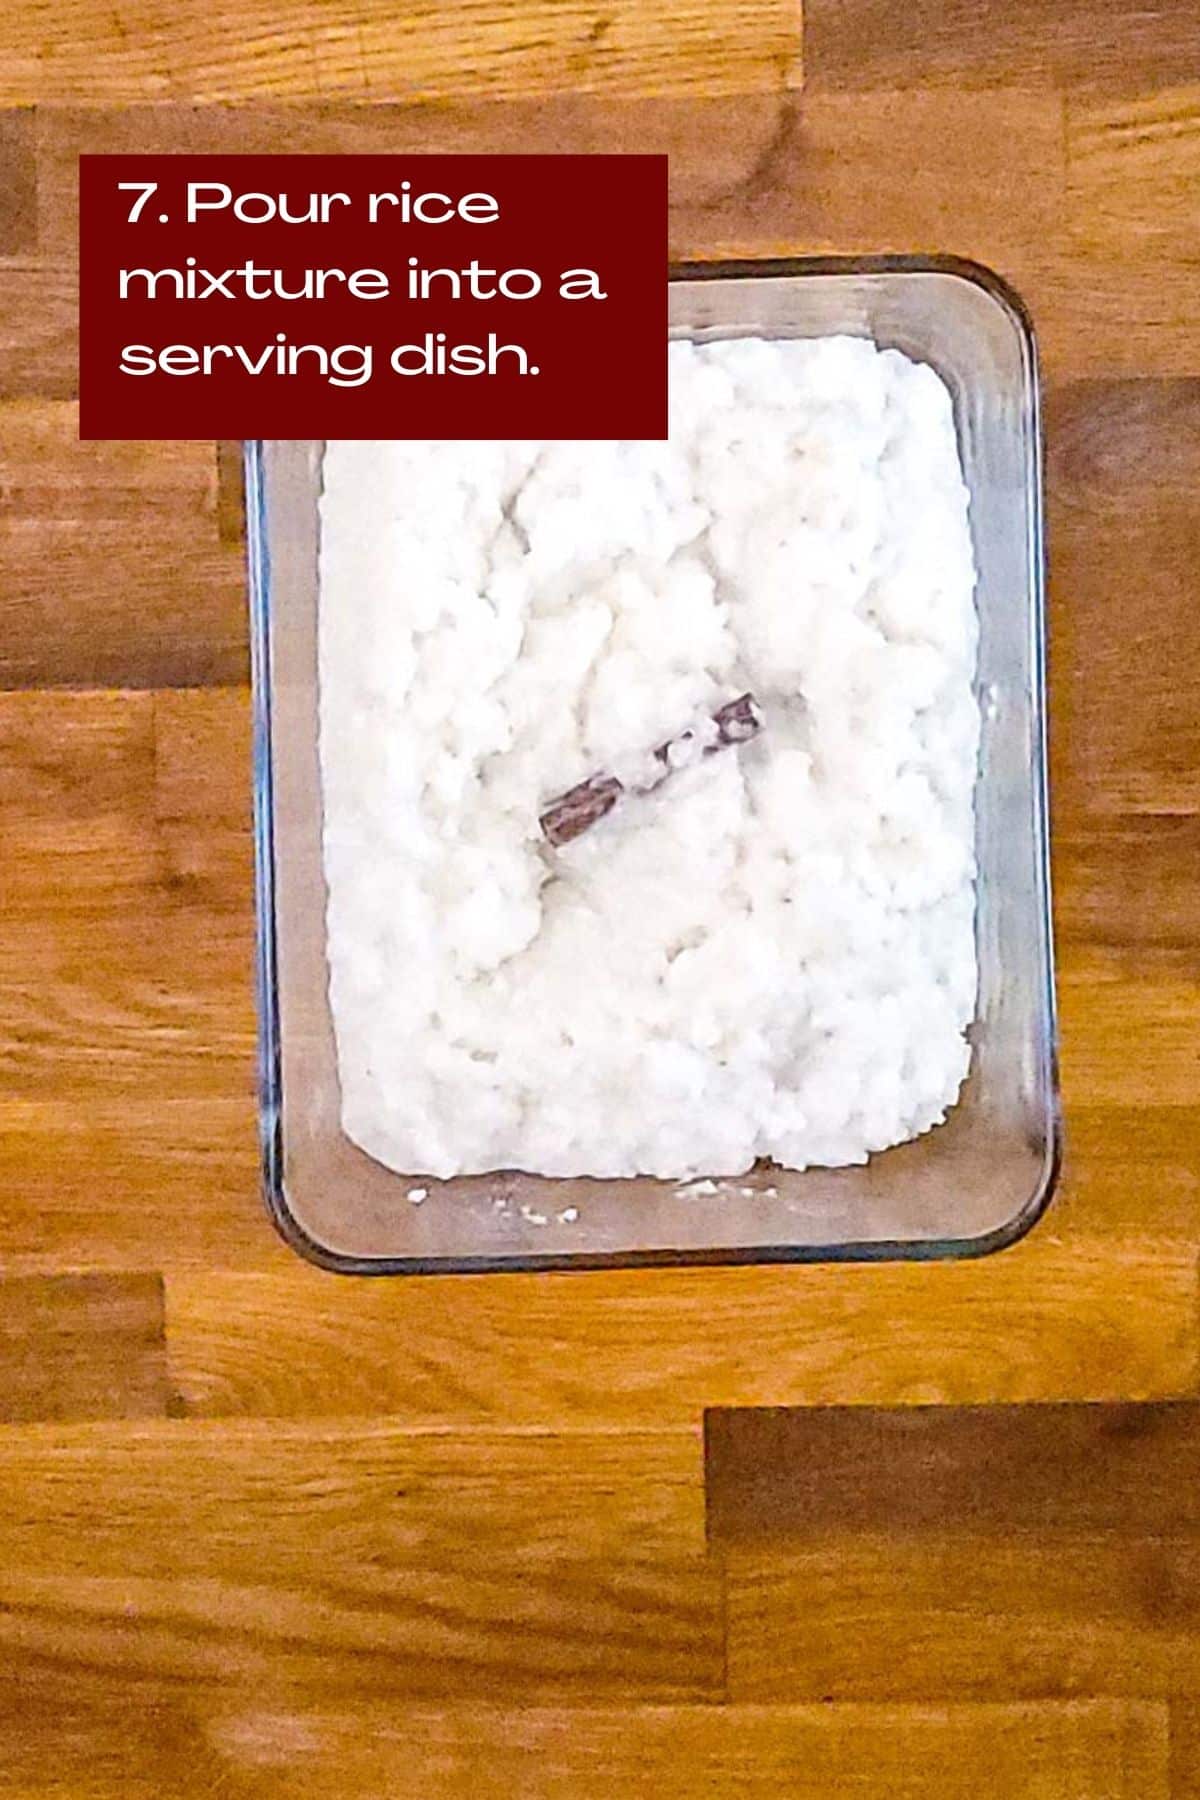 Rice mixture, once cooked and milk incorporated poured into a serving dish.